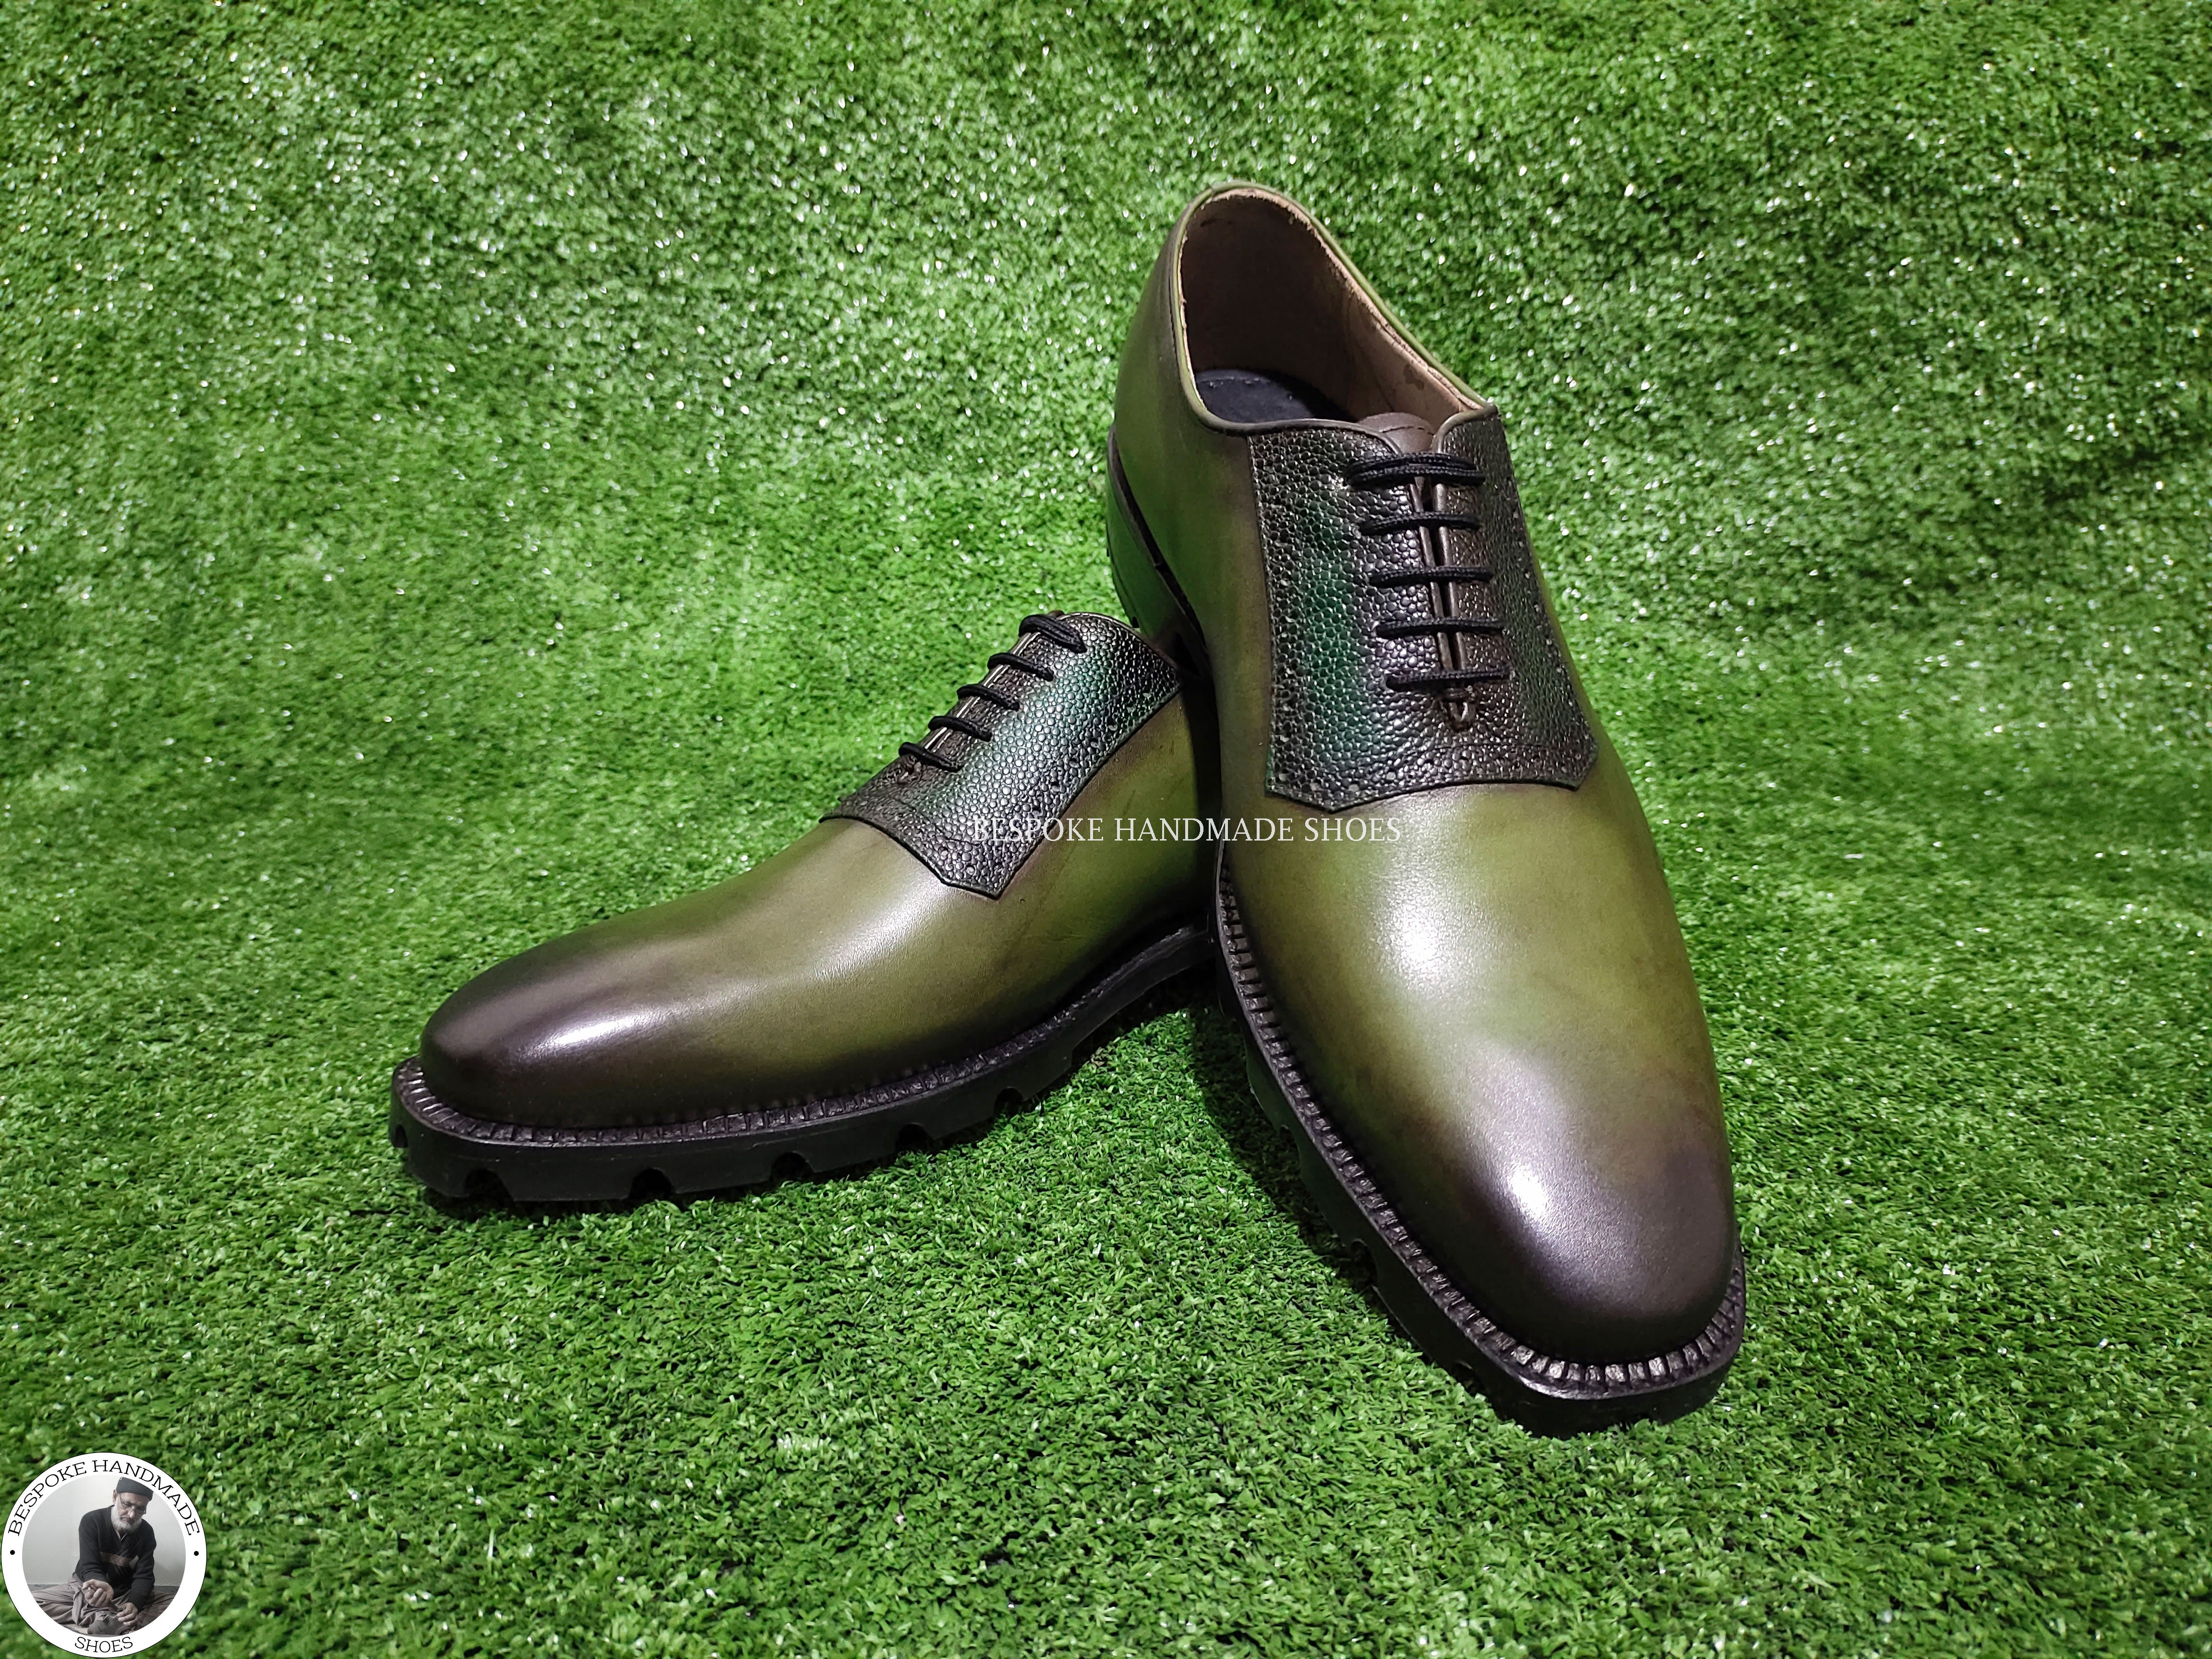 New Handcrafted Genuine Olive Green Bit Black Shaded Leather Toe Cap Lace Up Oxford Dress, Formal Shoes